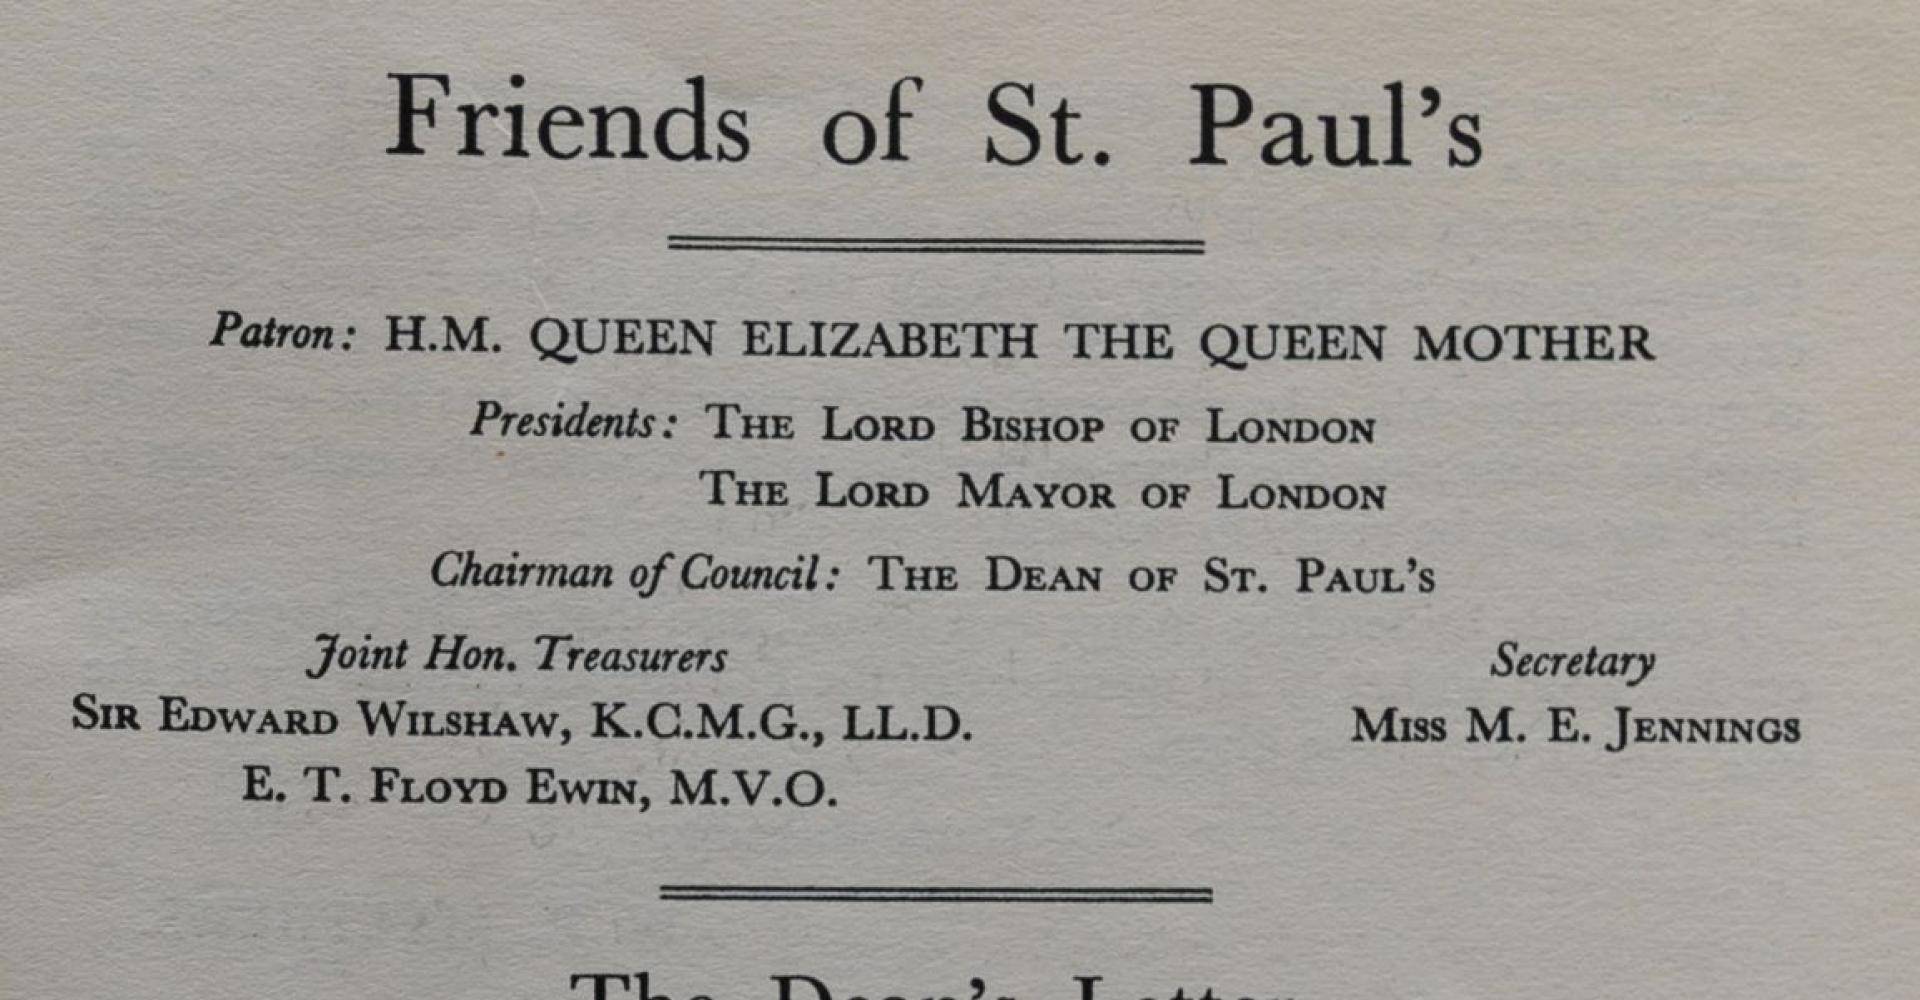 An early newsletter to the Friends of St Paul's